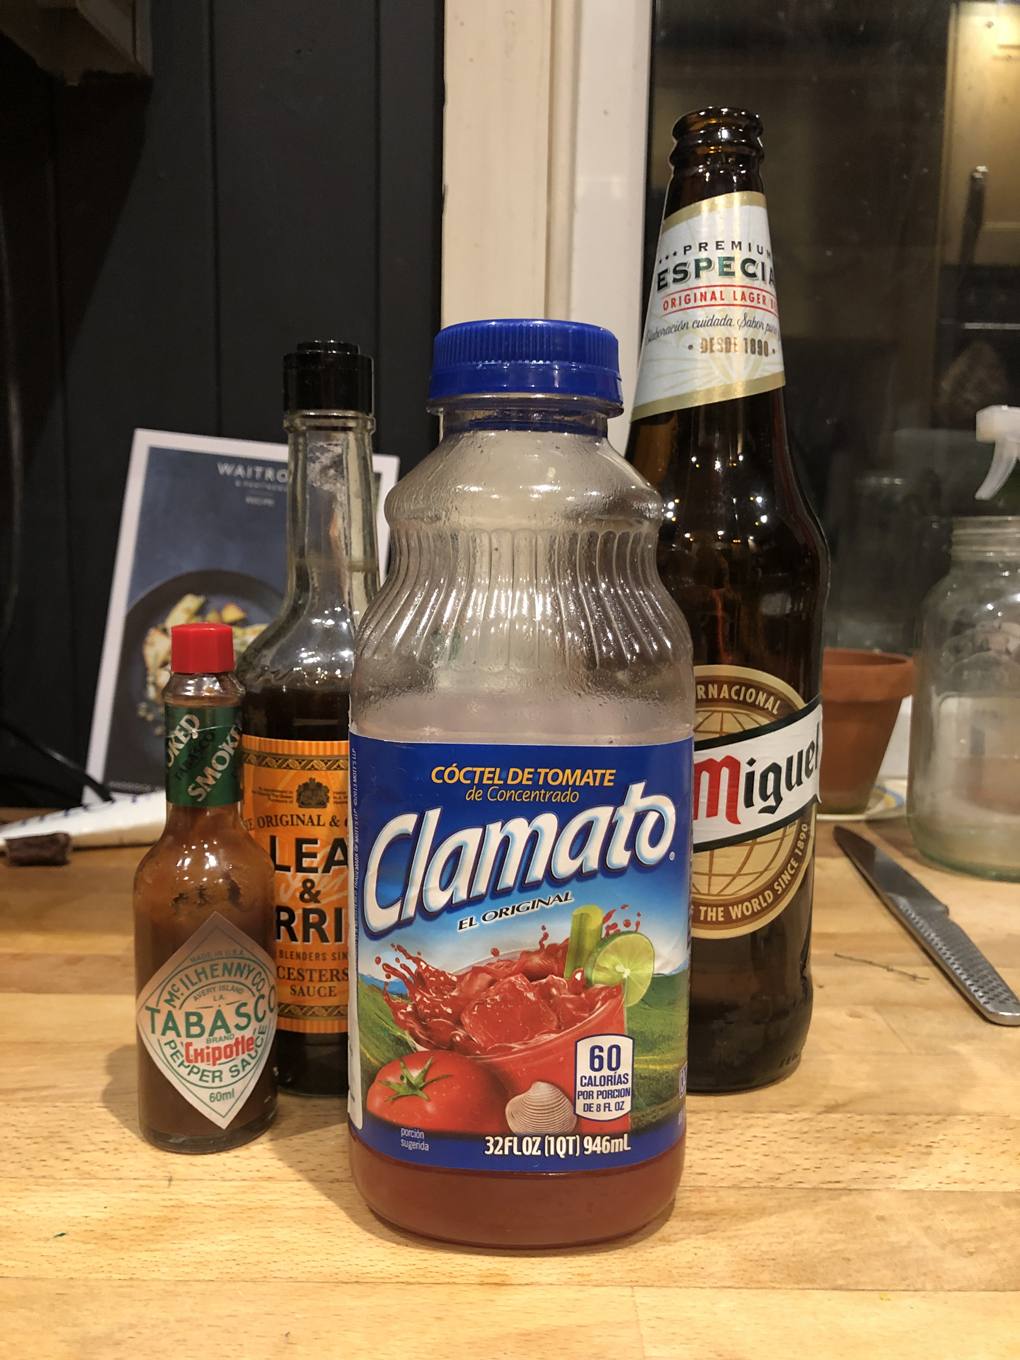 The ingredients for a michelada spiced beer cocktail